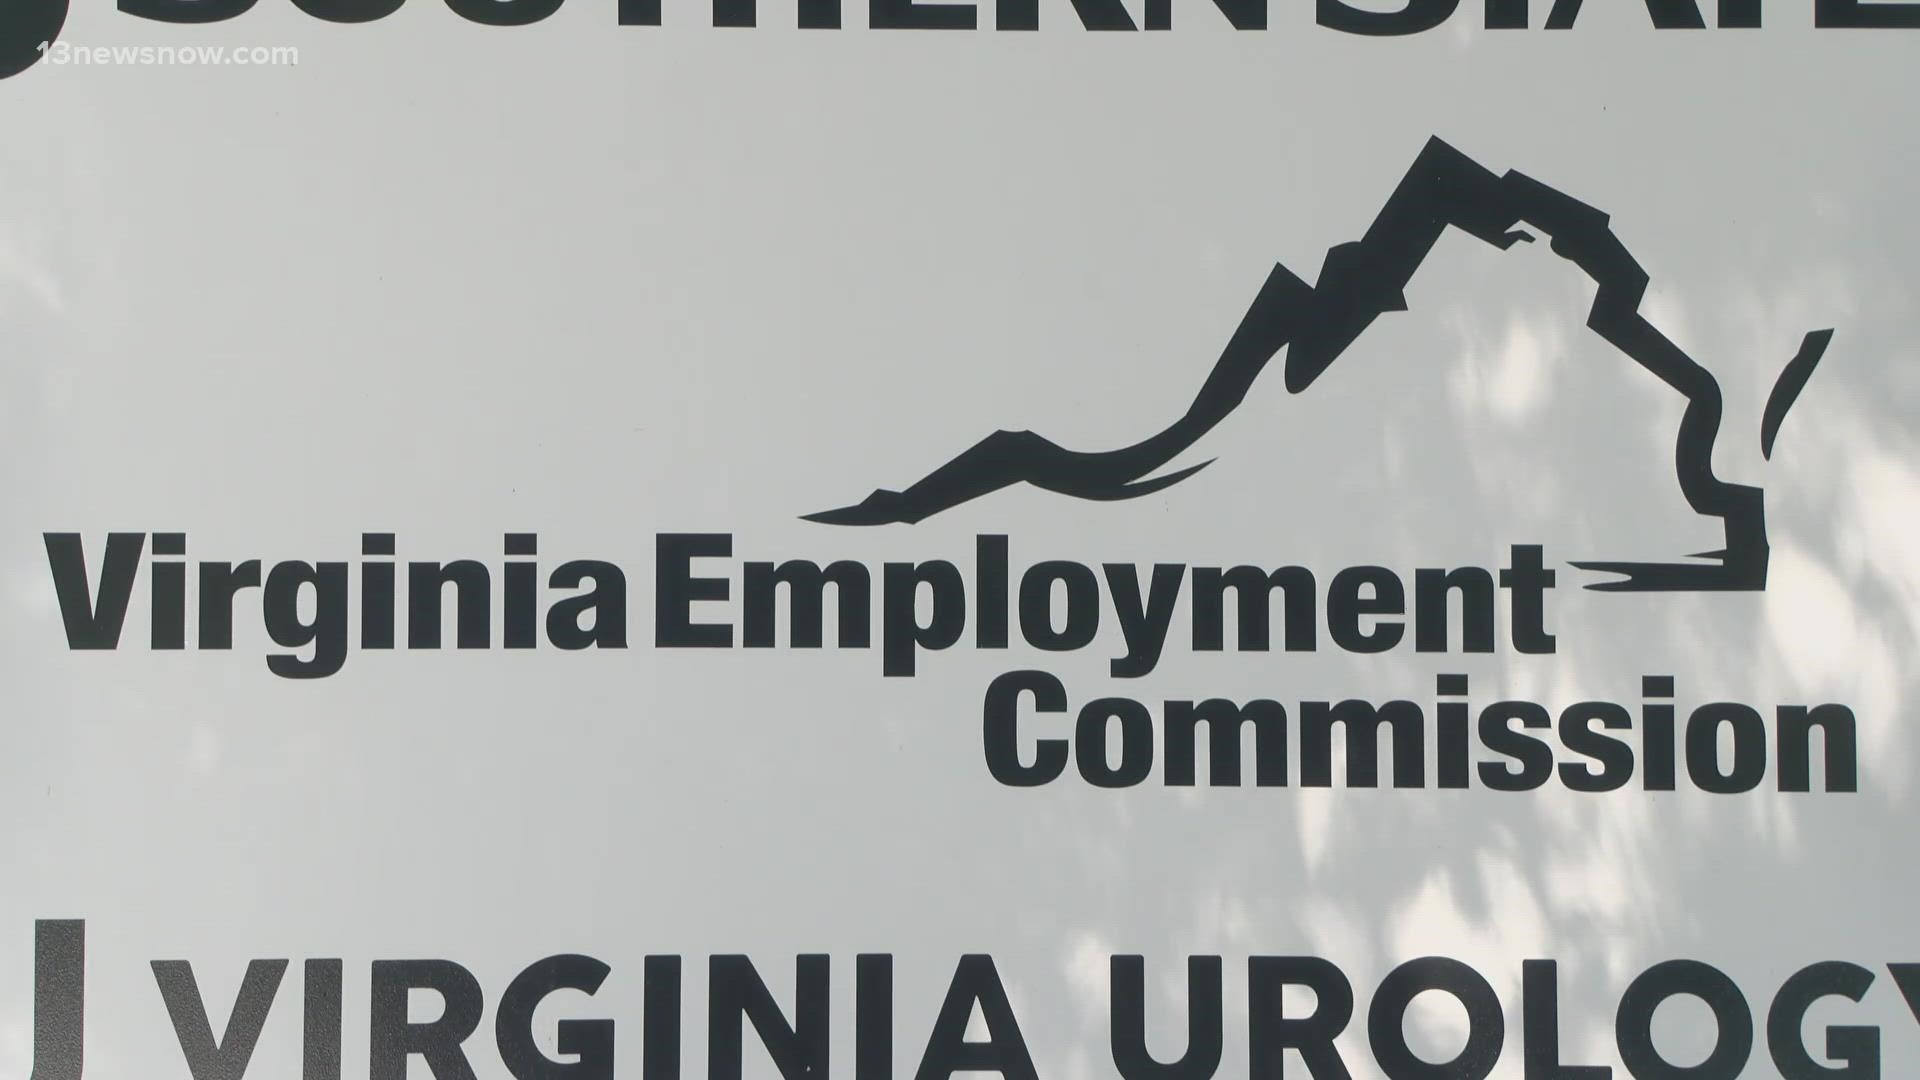 If you received a letter from the Virginia Employment Commission in the past few weeks, you might want to take a closer look at it.